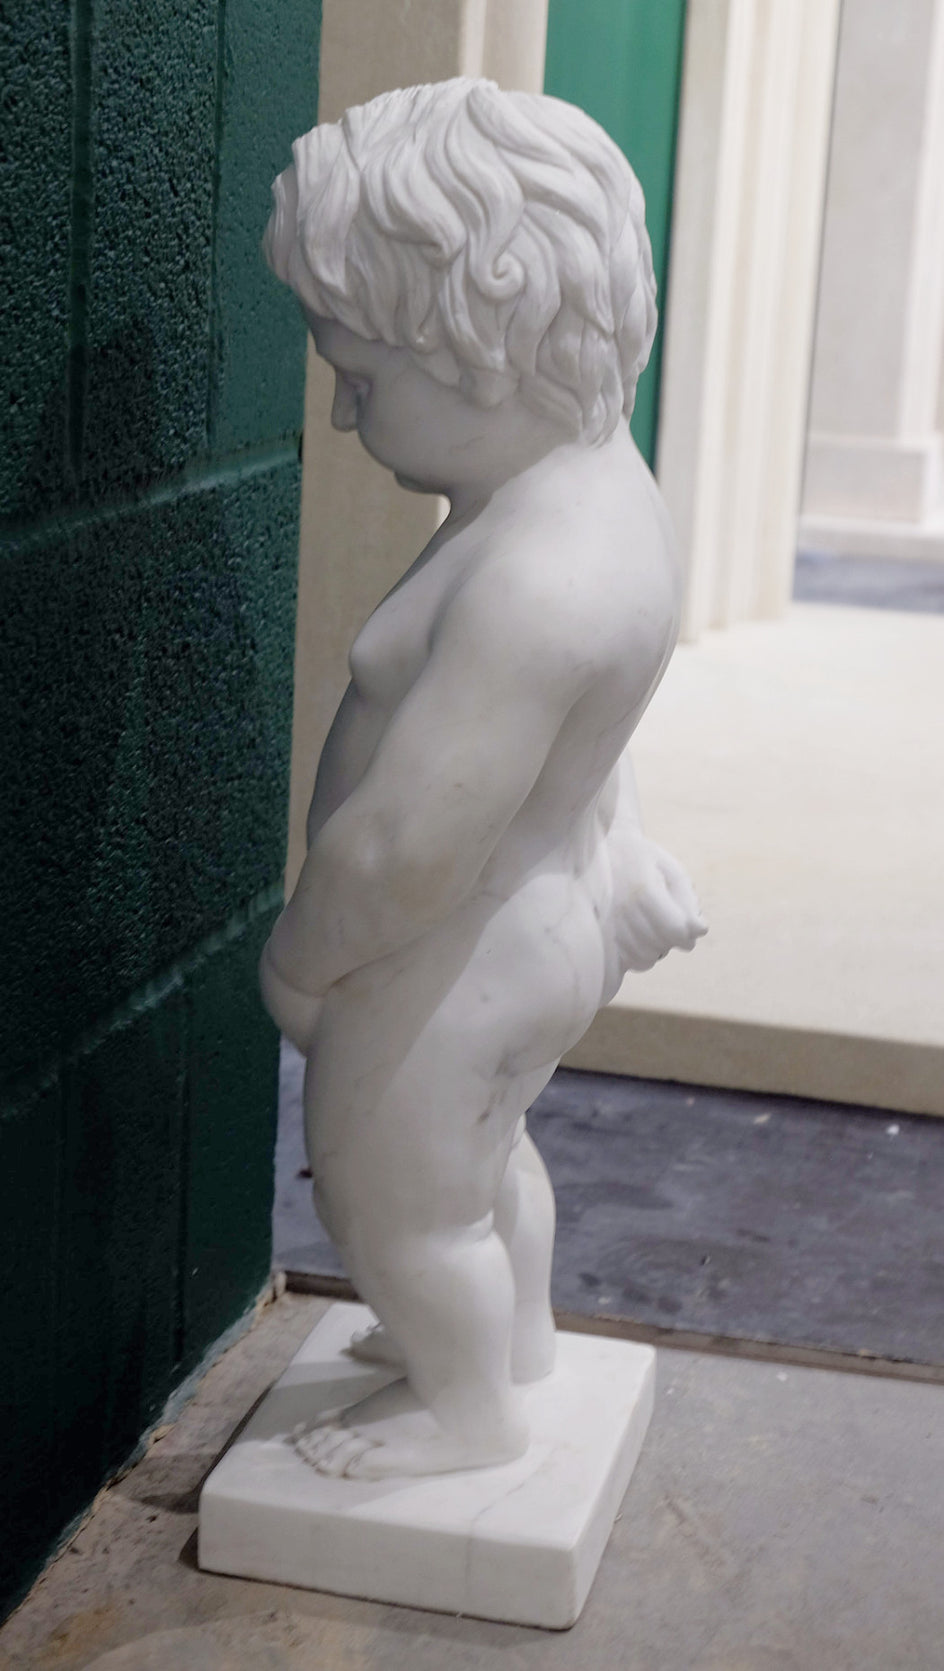 The Boys Will Be Boys Statue. (Veined White Marble)